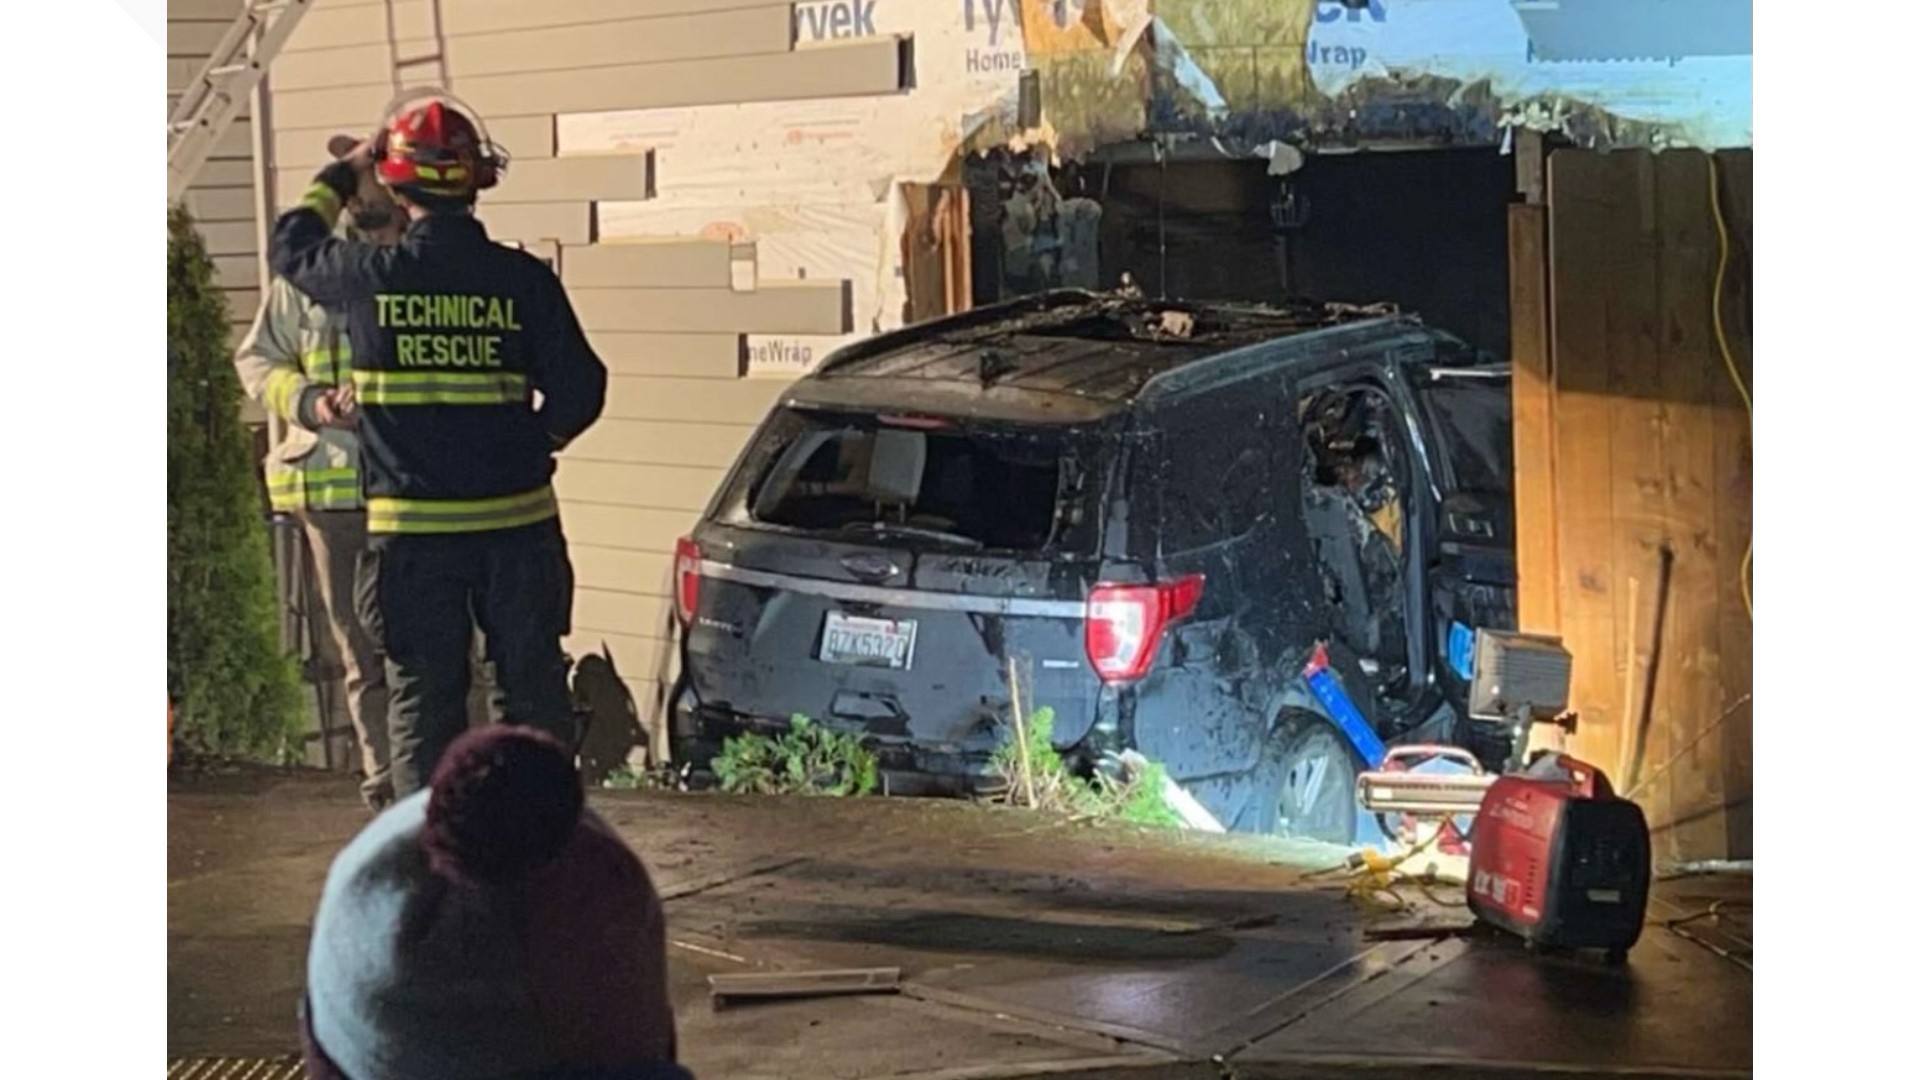 A 17-year-old and a 14-year-old were arrested after a vehicle crashed into a home and started a fire in Vancouver. A 5-year-old inside the home had minor injuries.